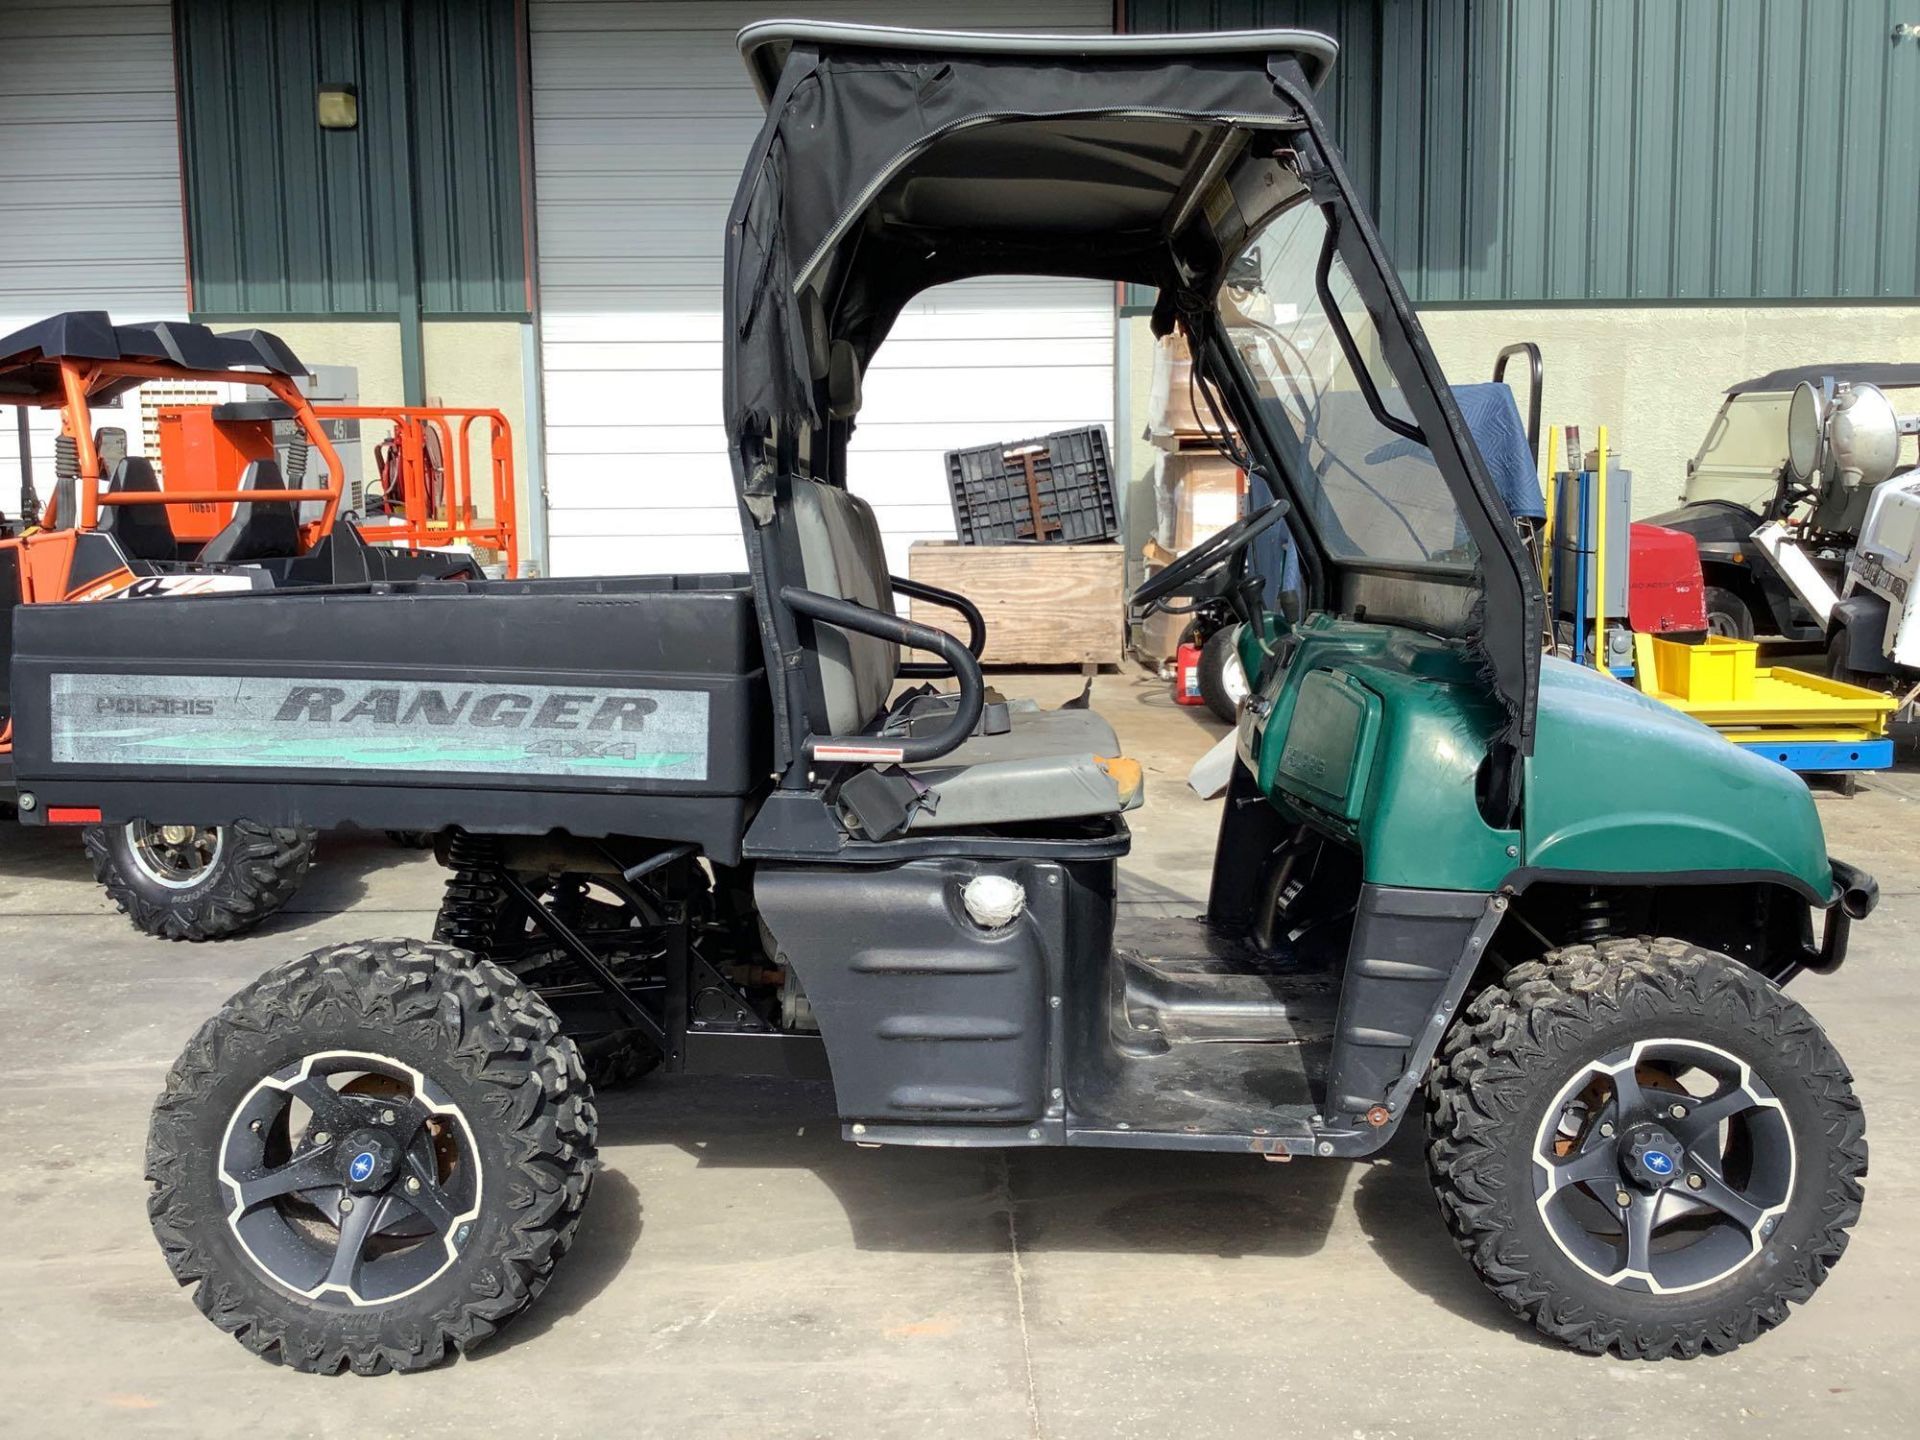 POLARIS RANGER 4x4, GAS POWERED, AWD, HITCH ON BACK, MANUAL DUMP BED, WINDSHIELD WIPER, RUNS AND OPE - Image 7 of 14